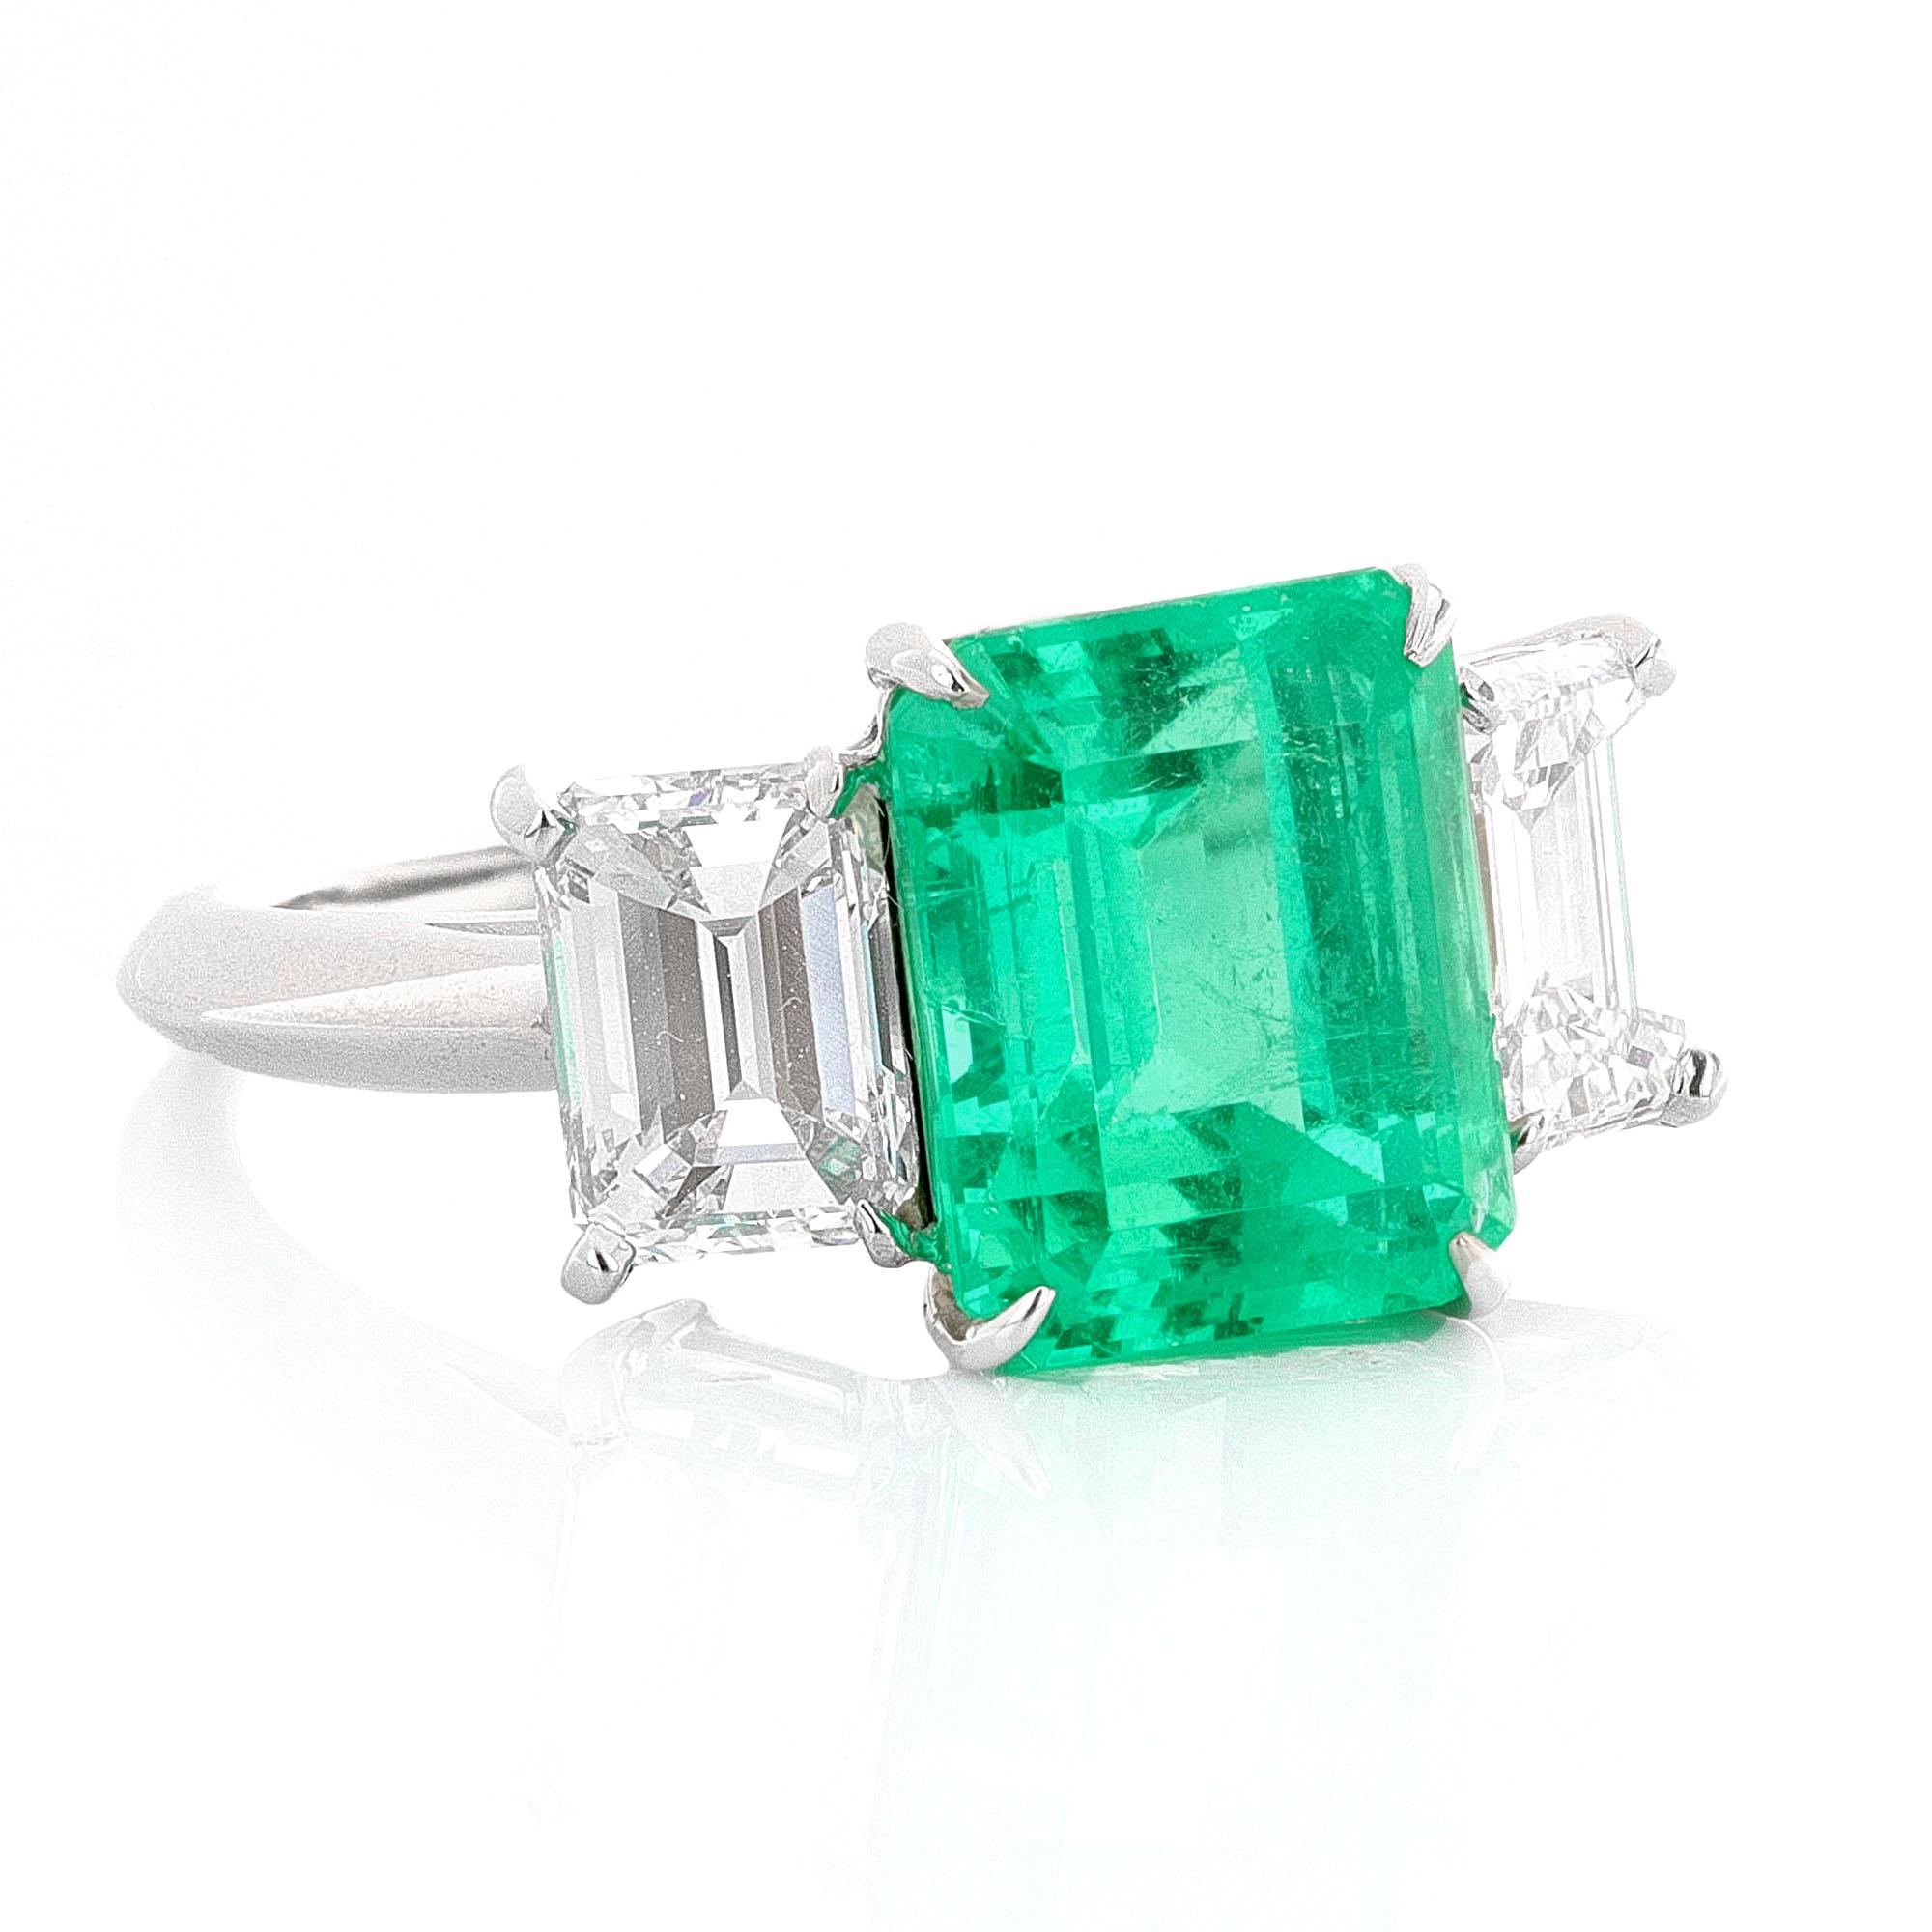 Platinum three stone emerald ring with diamond side stones. The center stone is AGL certified and the side stones are GIA certified. AGL describes the center stone as a 4.27 carat, emerald cut emerald. The emerald is natural, green, and has Minor